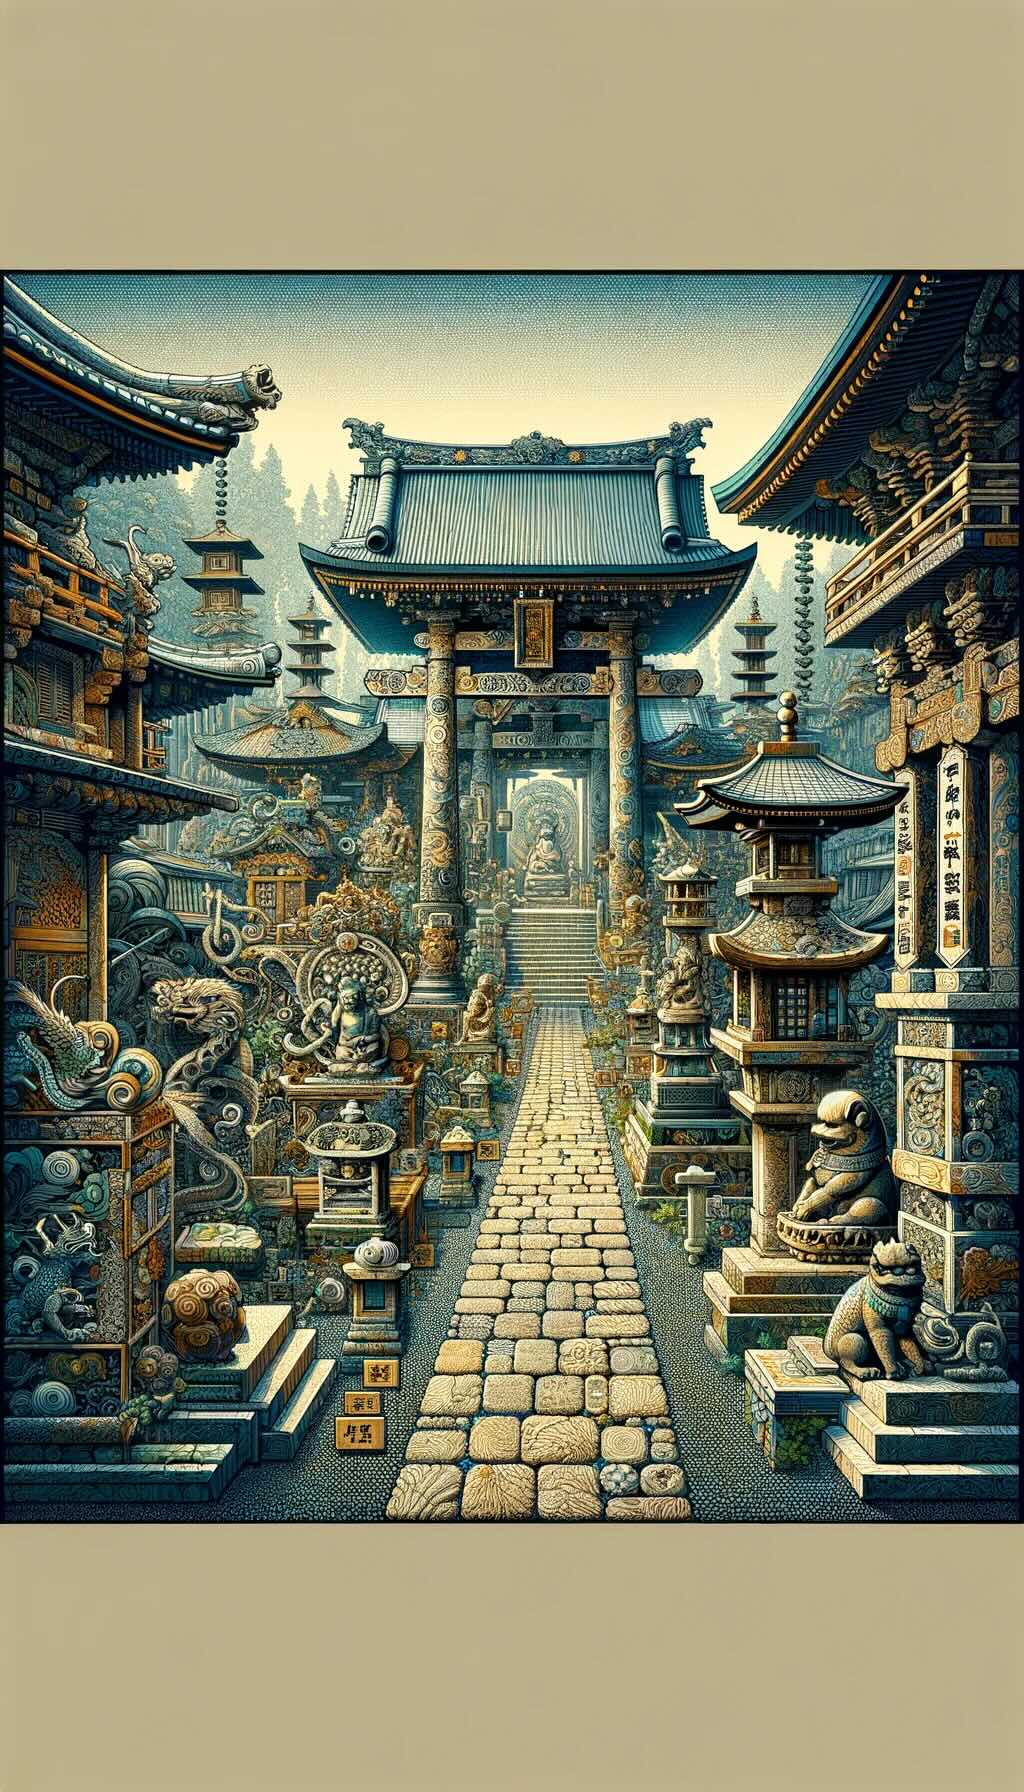 Historical and cultural importance of shrines and temples in Japan, depicts these sacred spaces as living chronicles of Japan's history, showcasing architectural elements and symbols such as gravel paths, torii gates, pagodas, intricate carvings, komainu (guardian lion-dogs), and Buddha statues. The depth and richness of symbolism in the architecture of shrines and temples are vividly conveyed, reflecting their role as centers of cultural, historical, and spiritual significance capturing the essence of these sacred spaces.